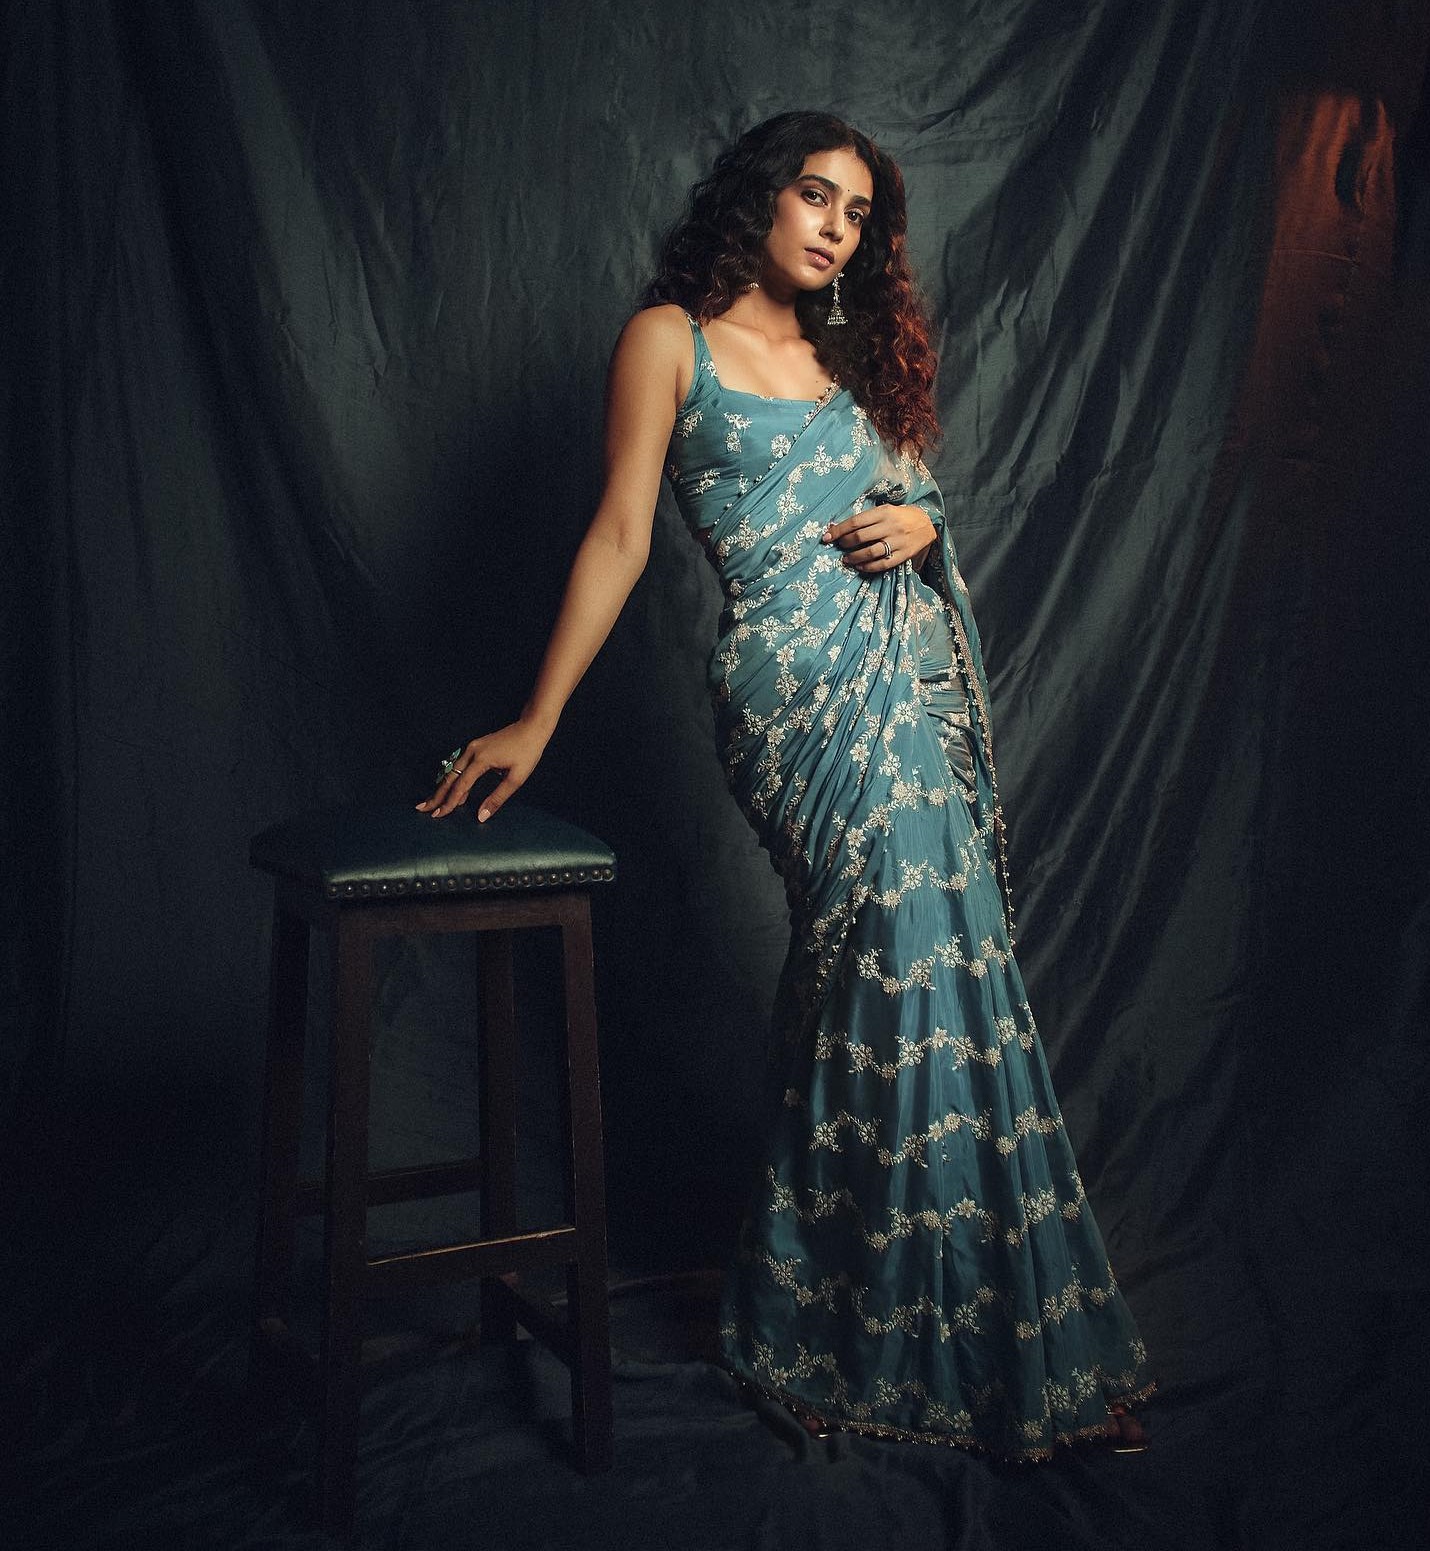 Aakanksha Singh Looks Stunning In Blue Embroidered Monochrome Saree With Sleeveless Blouse